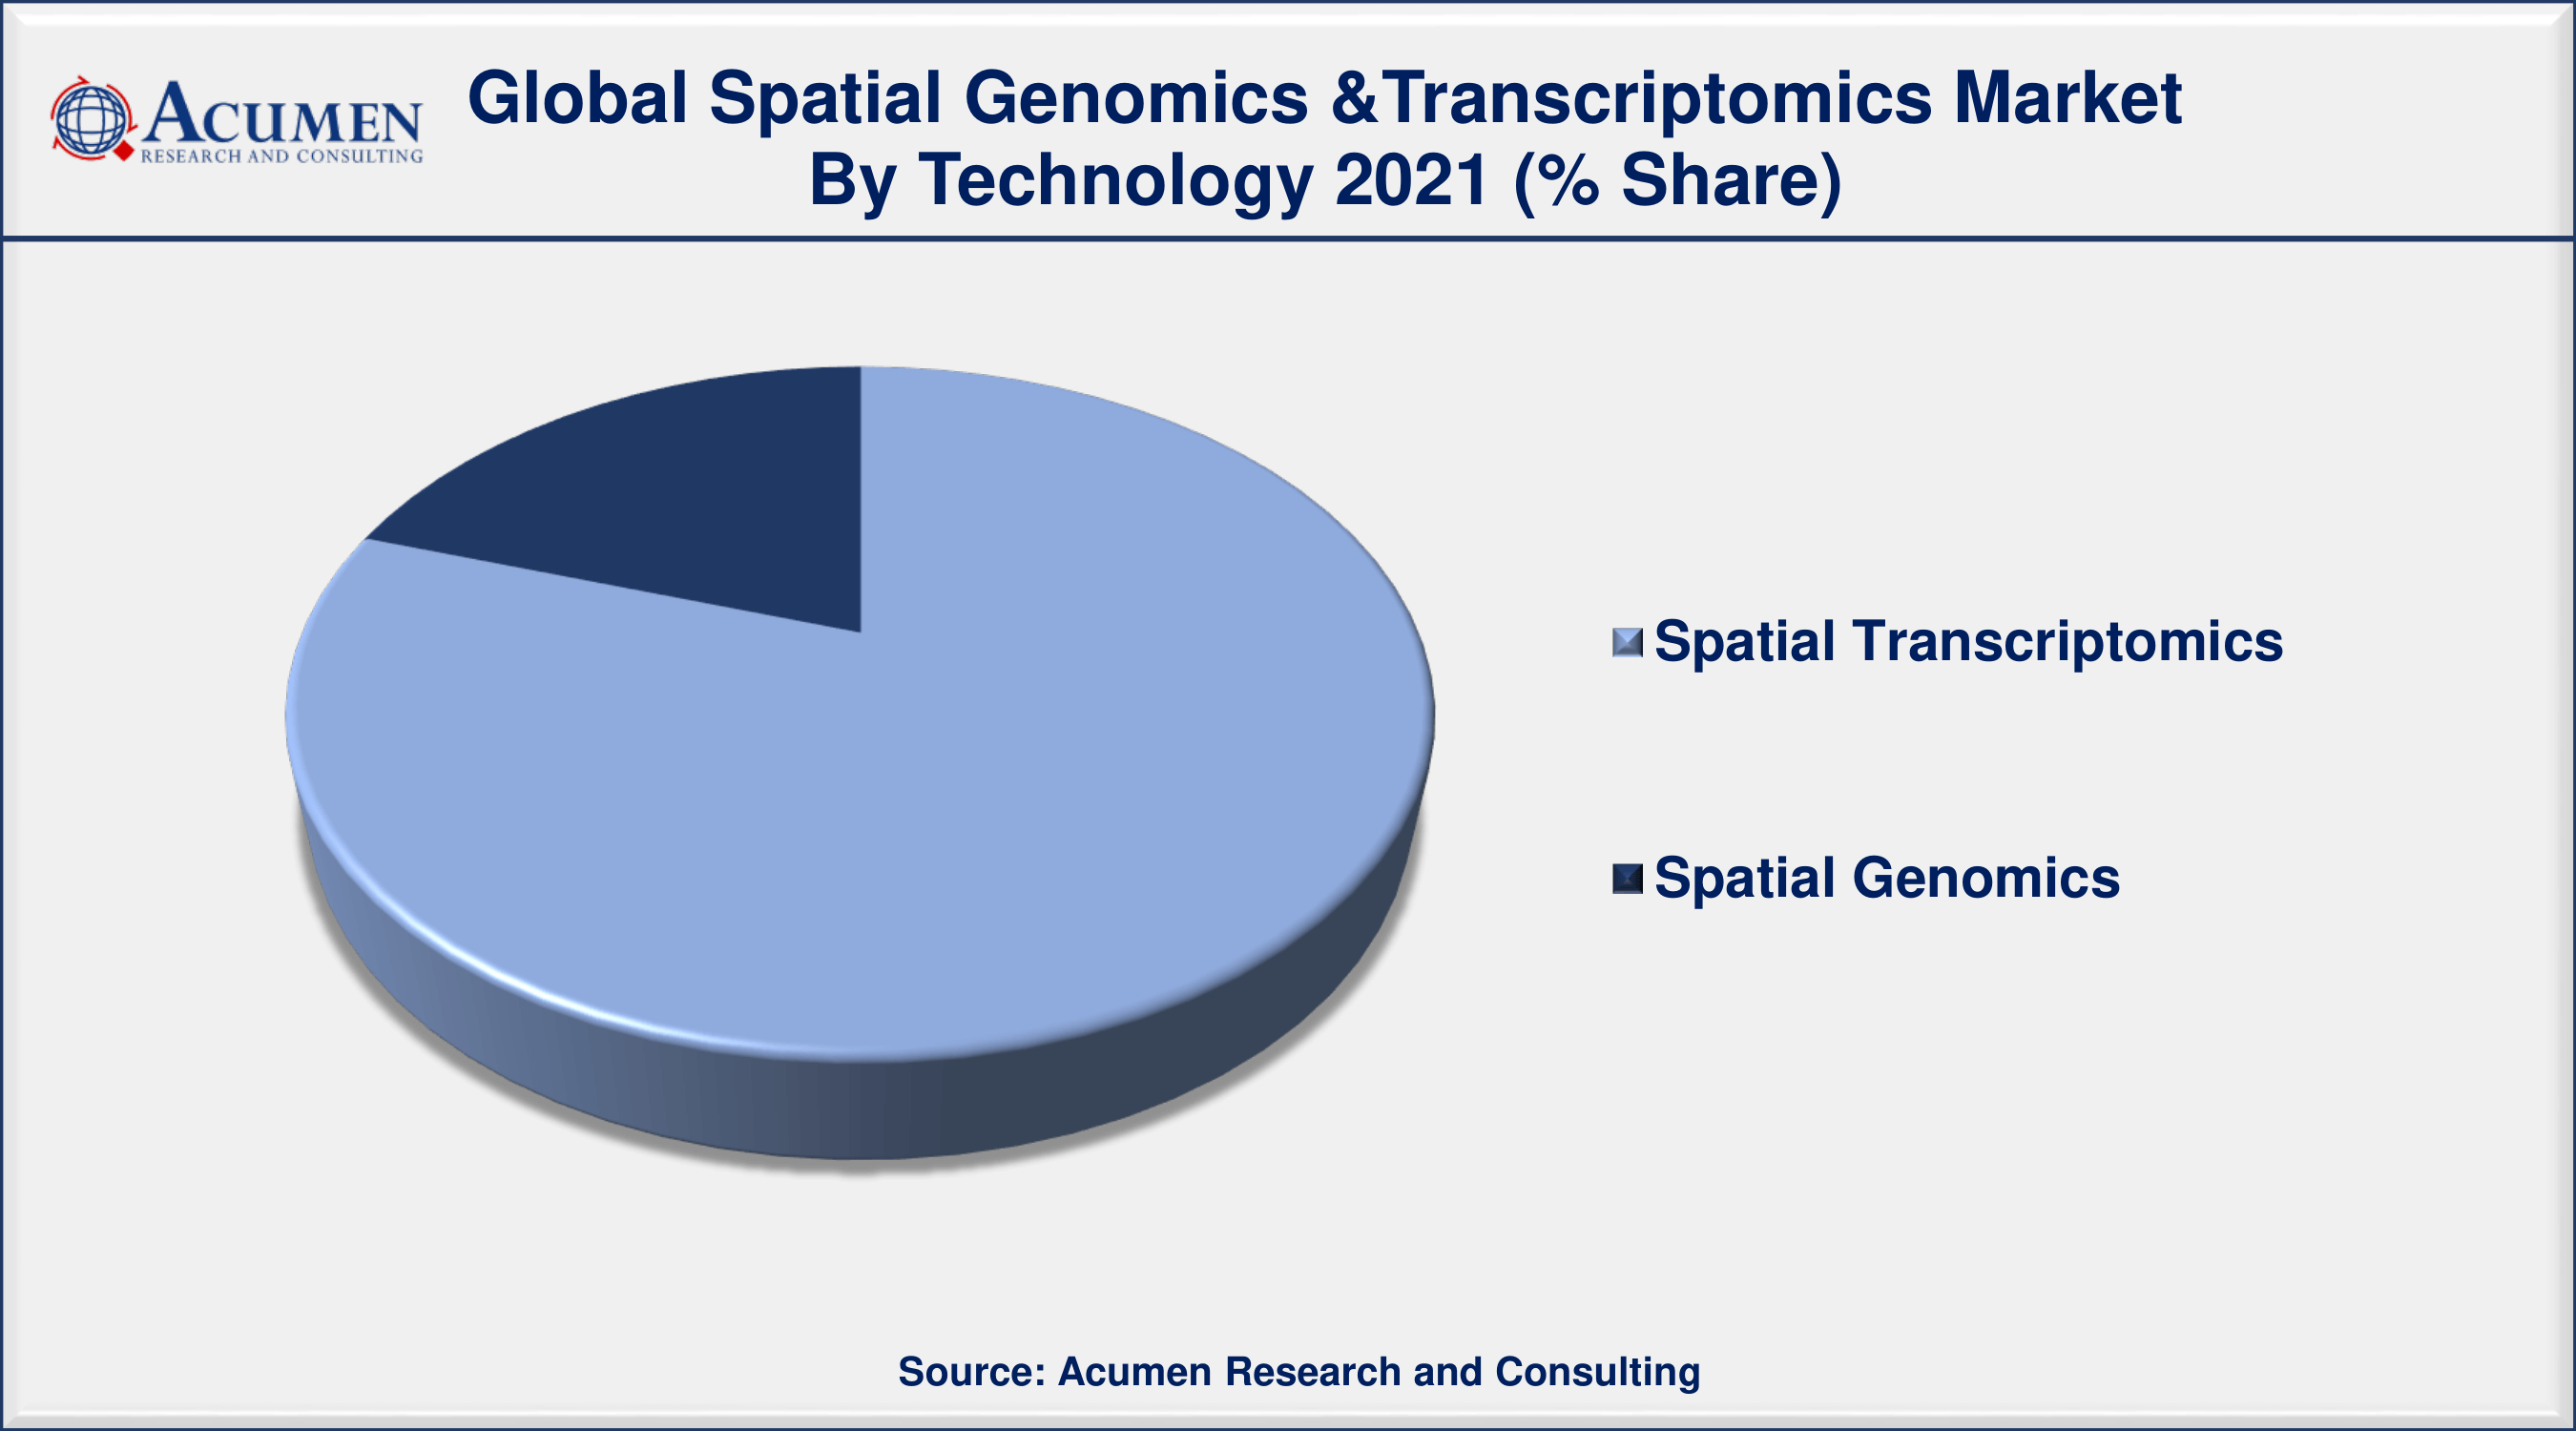 Among technology, spatial transcriptomic segment engaged more than 80% of the total market share in 2021